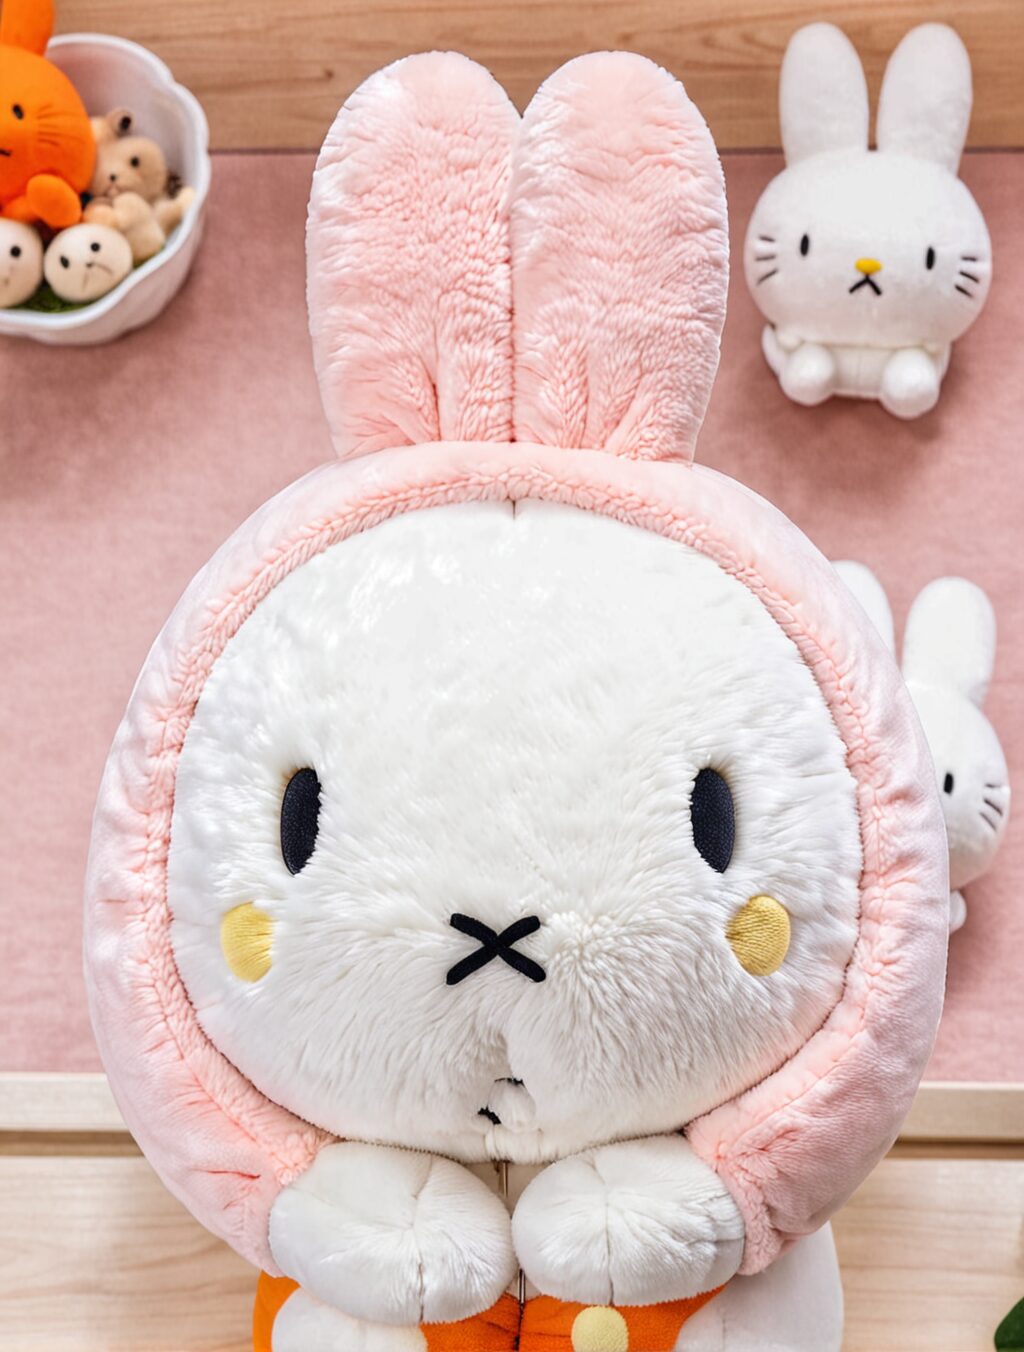 why is miffy so popular in japan